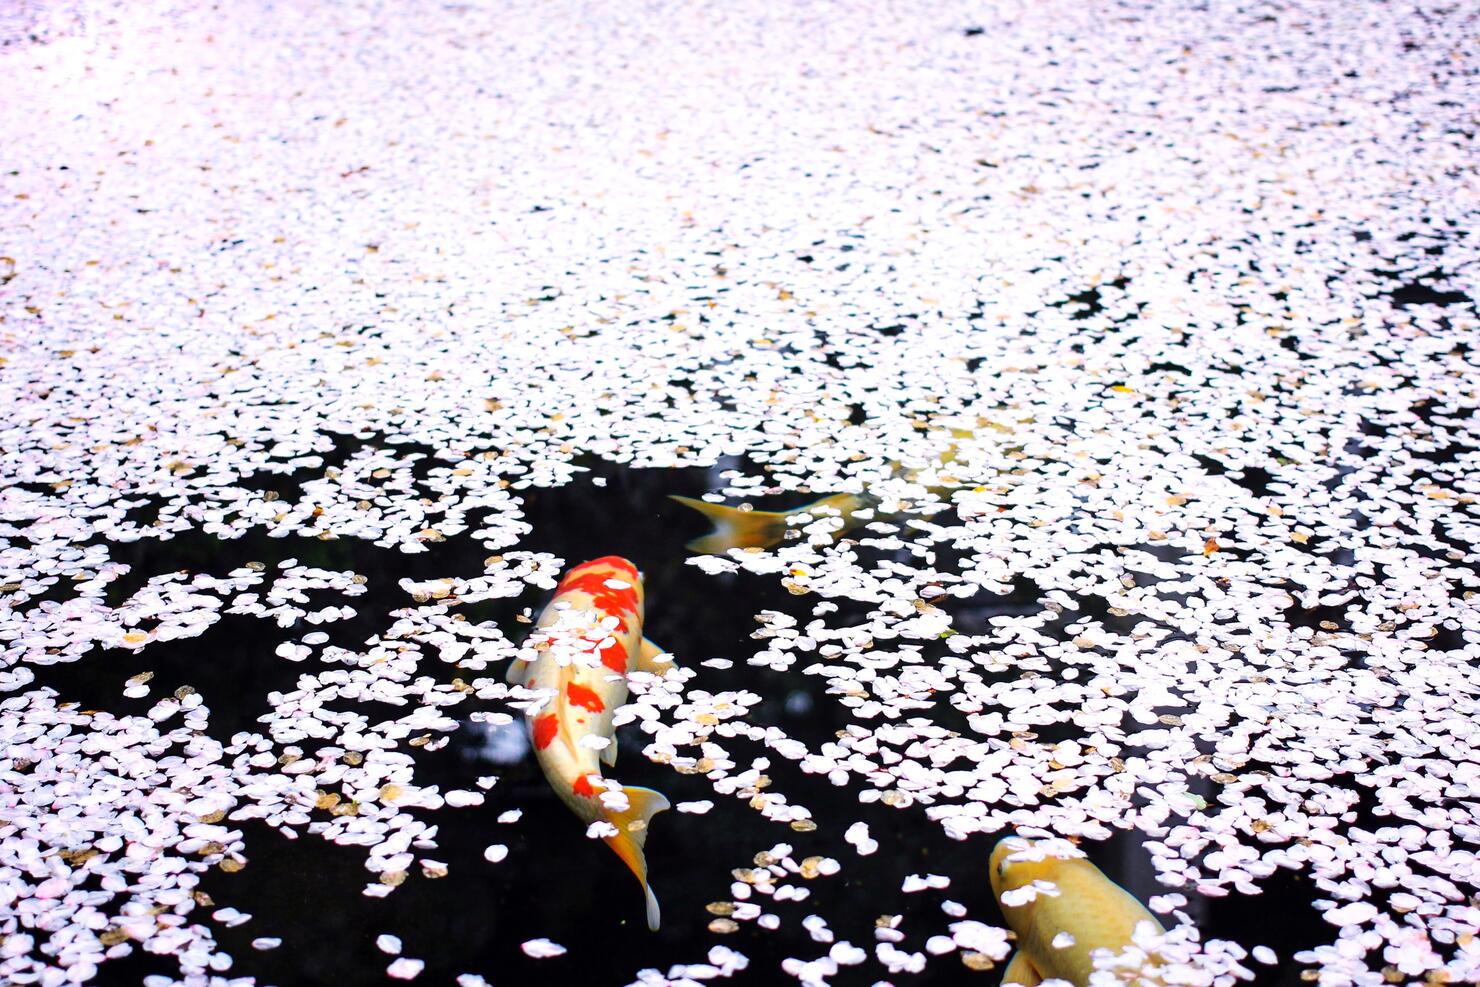 High Angle View Of Koi Fish In Pond